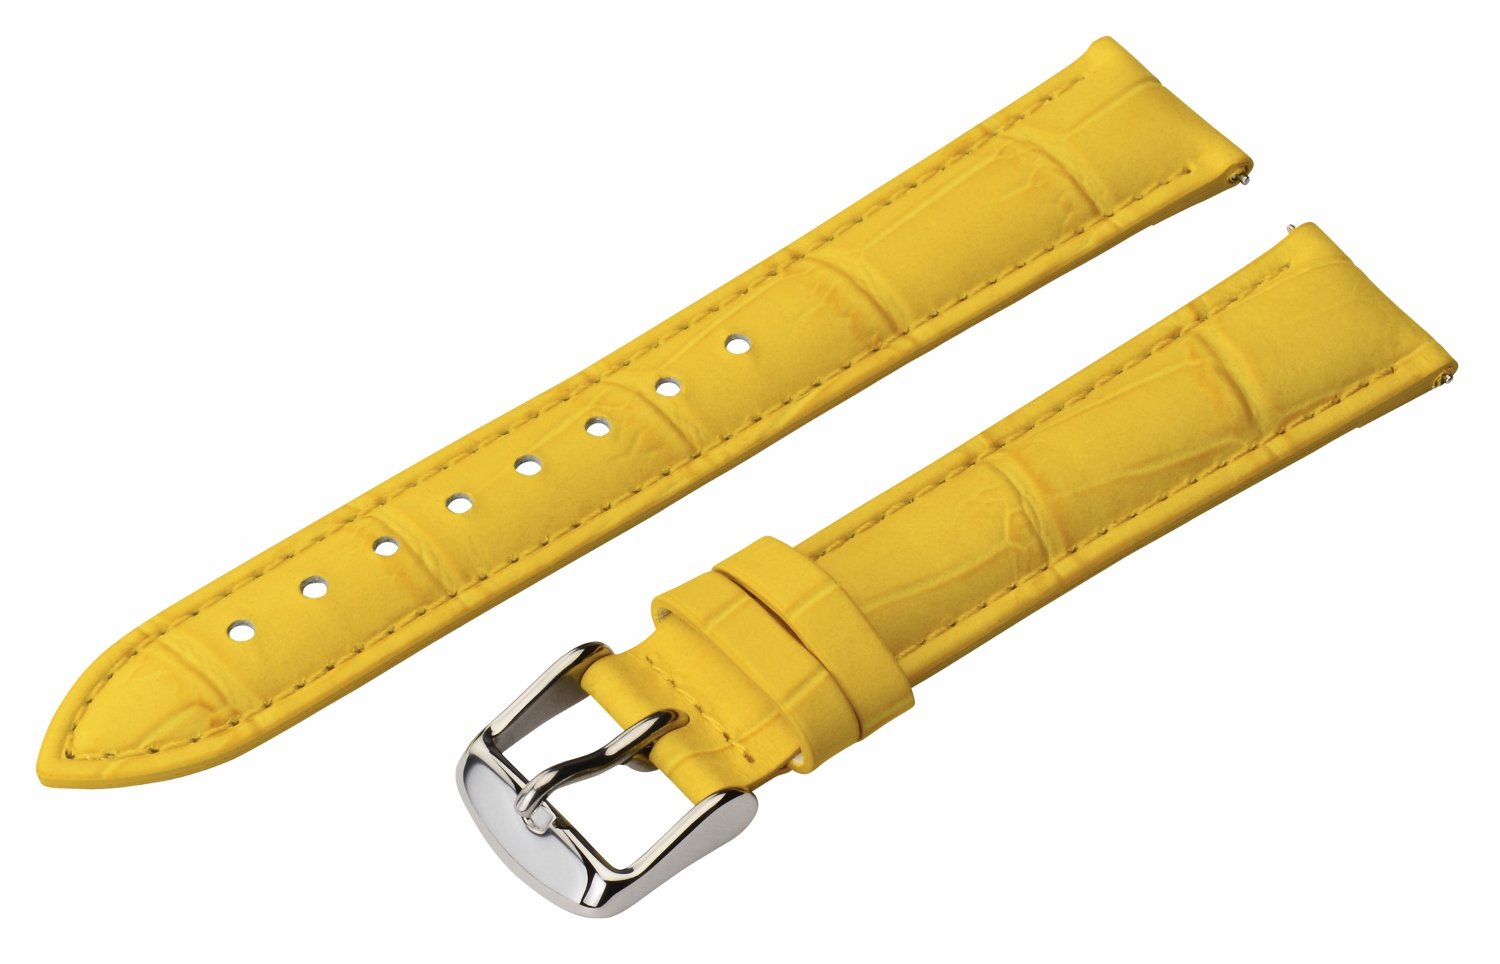 Clockwork Synergy - 2 Piece Ss Leather Classic Croco Grain Interchangeable Replacement Watch Band Strap 21mm - Solid Yellow - Men Women